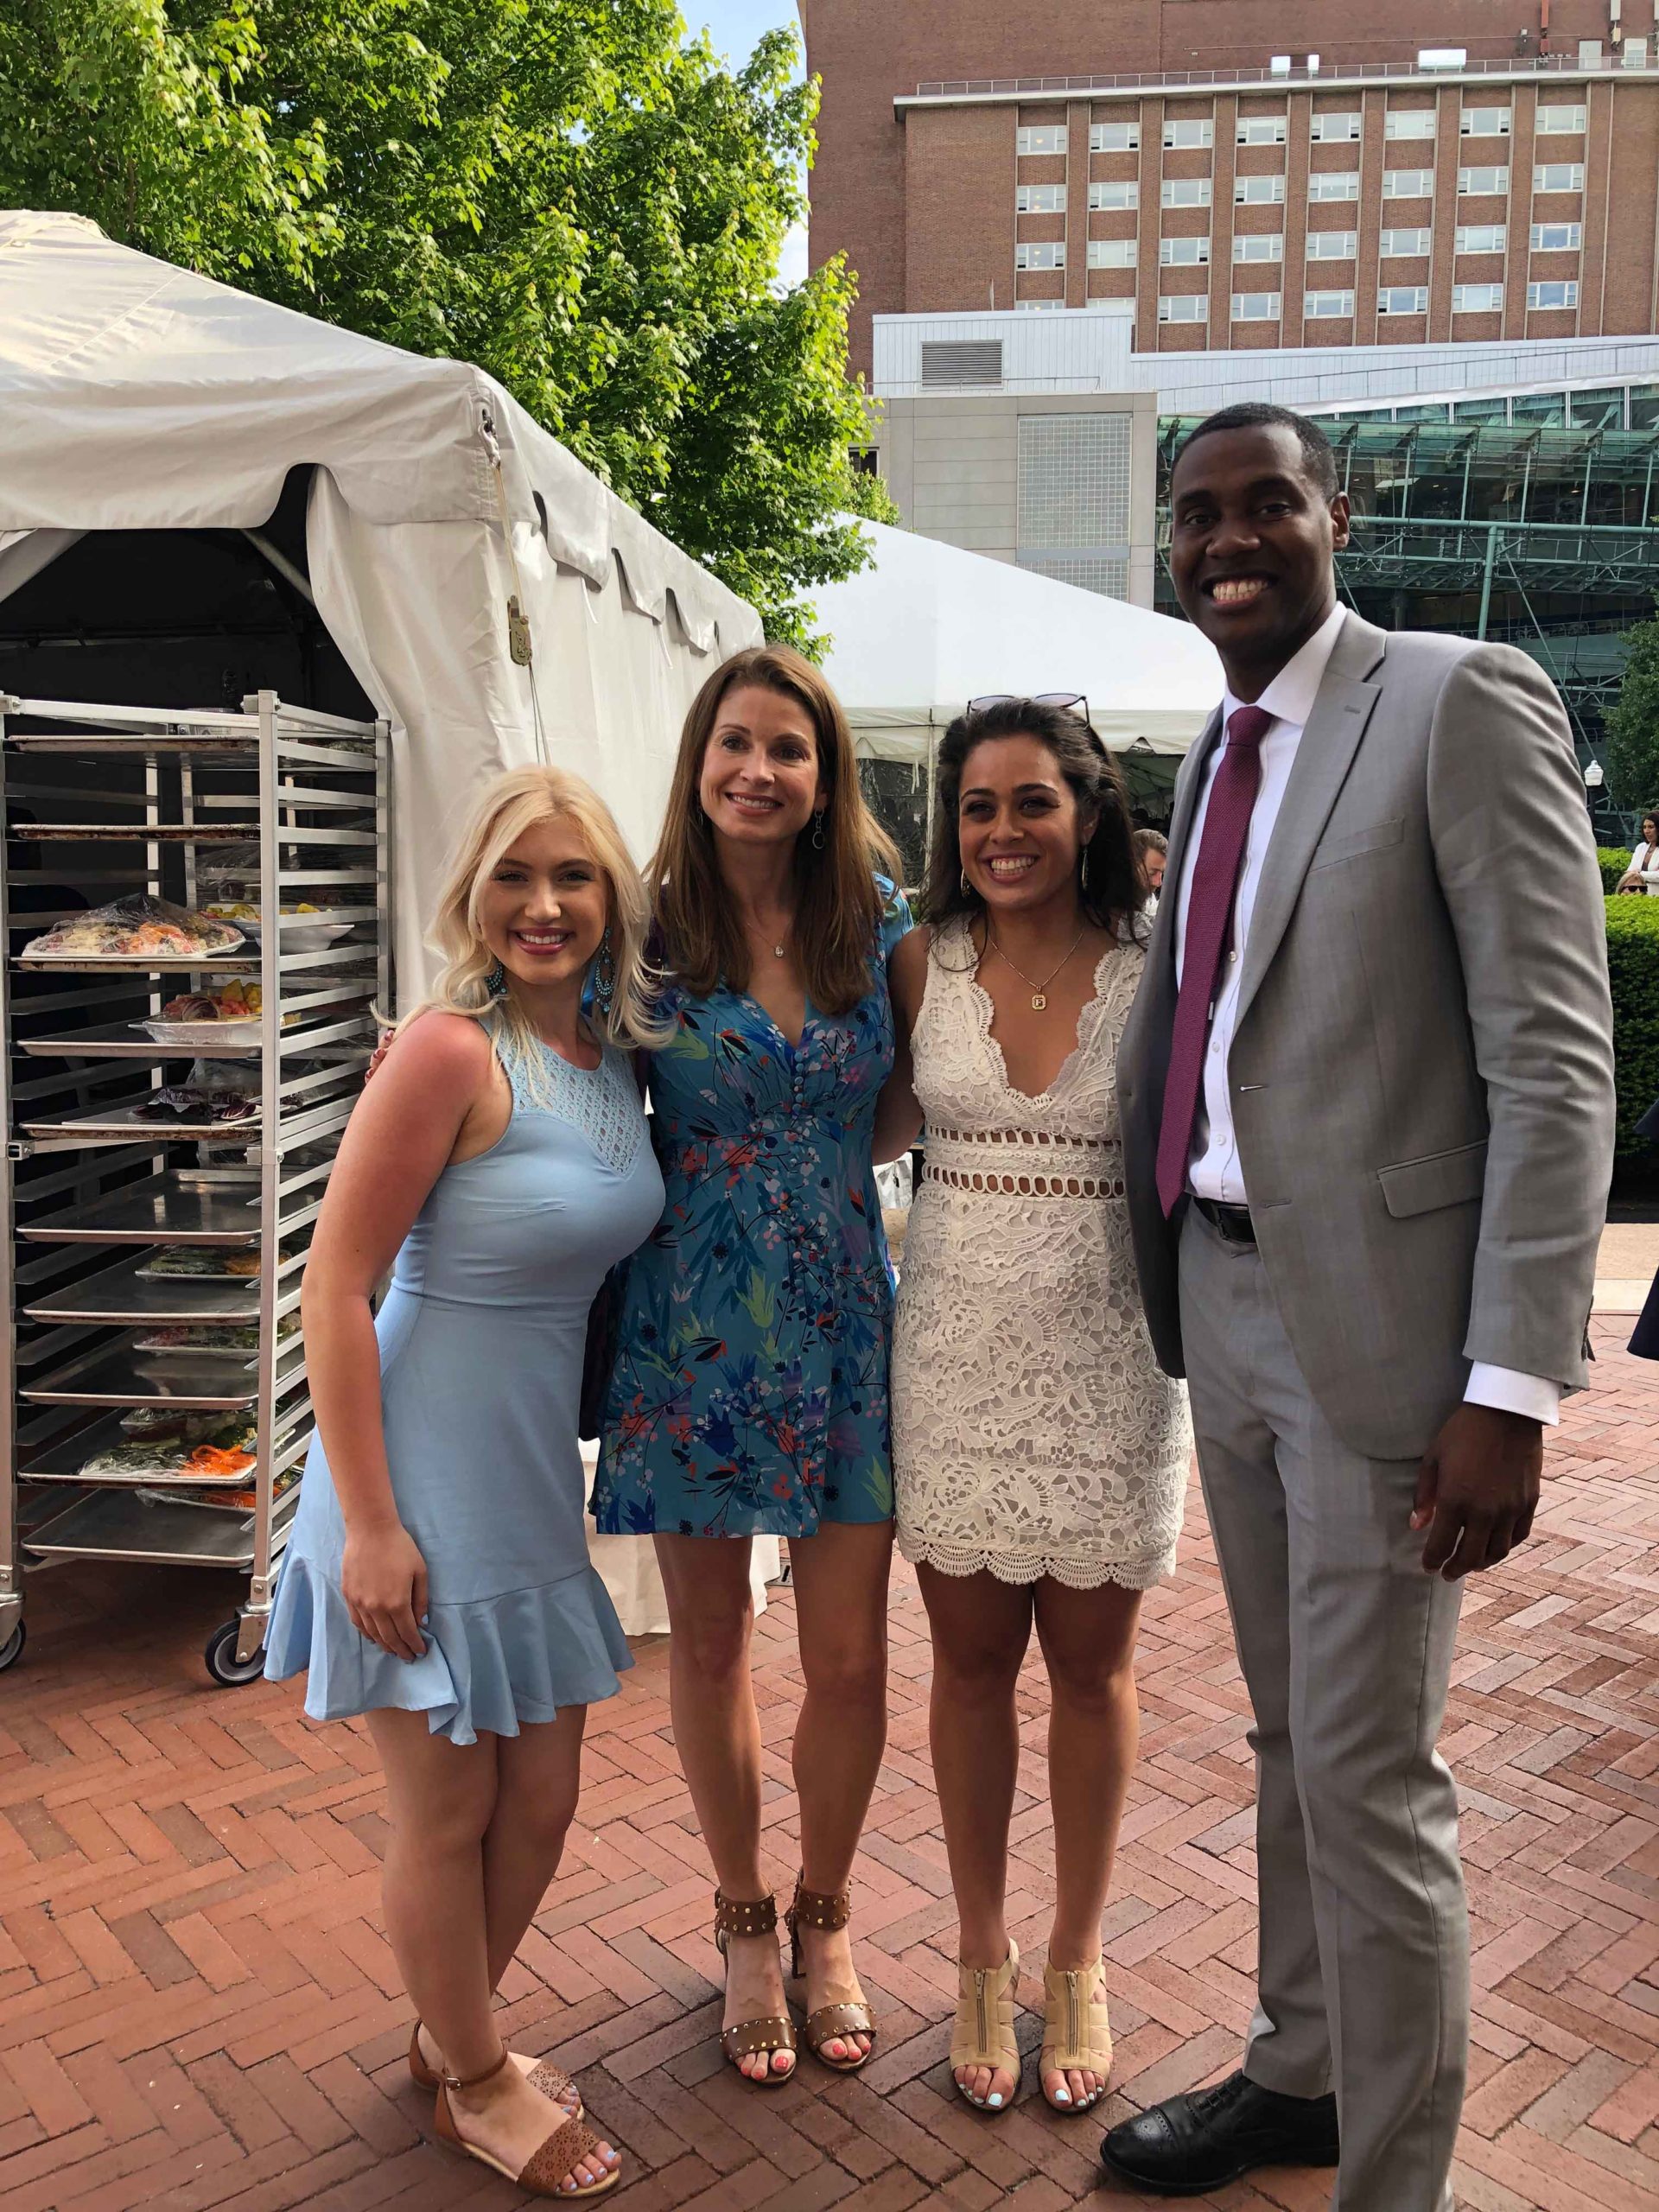 With Class of ‘19 Columbia Journalism School grads Kristy Cappiello, Farah Otero-Amad, and Blake Ralling